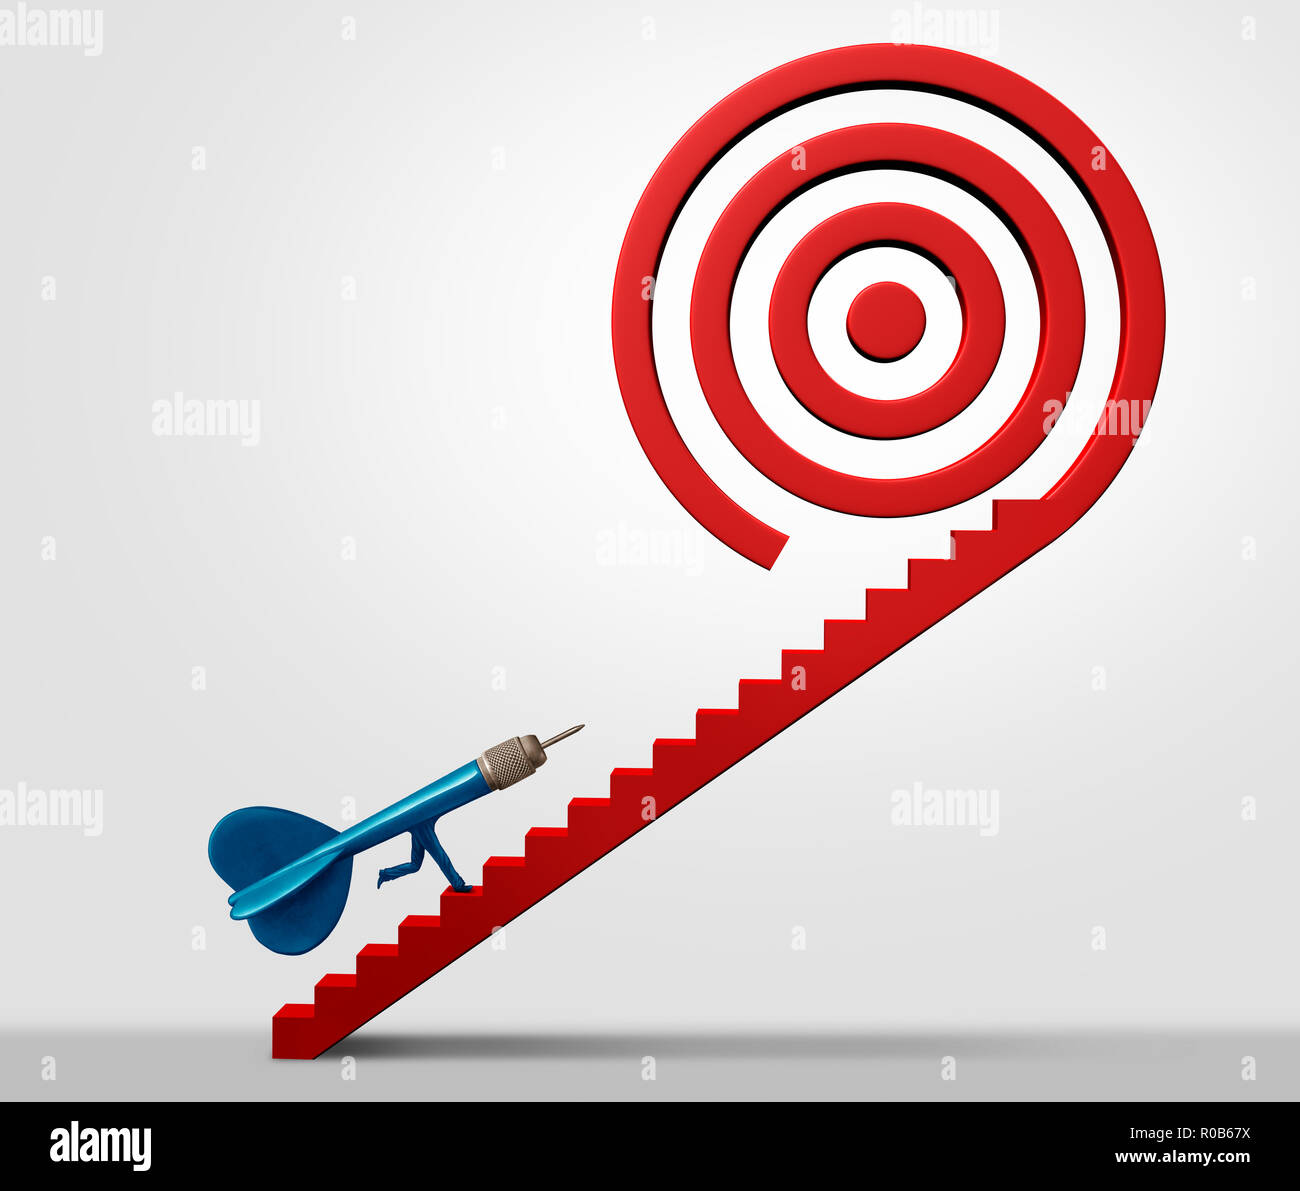 Strategic pathway business success and bullseye concept of direction and career goals with 3D illustration elements. Stock Photo